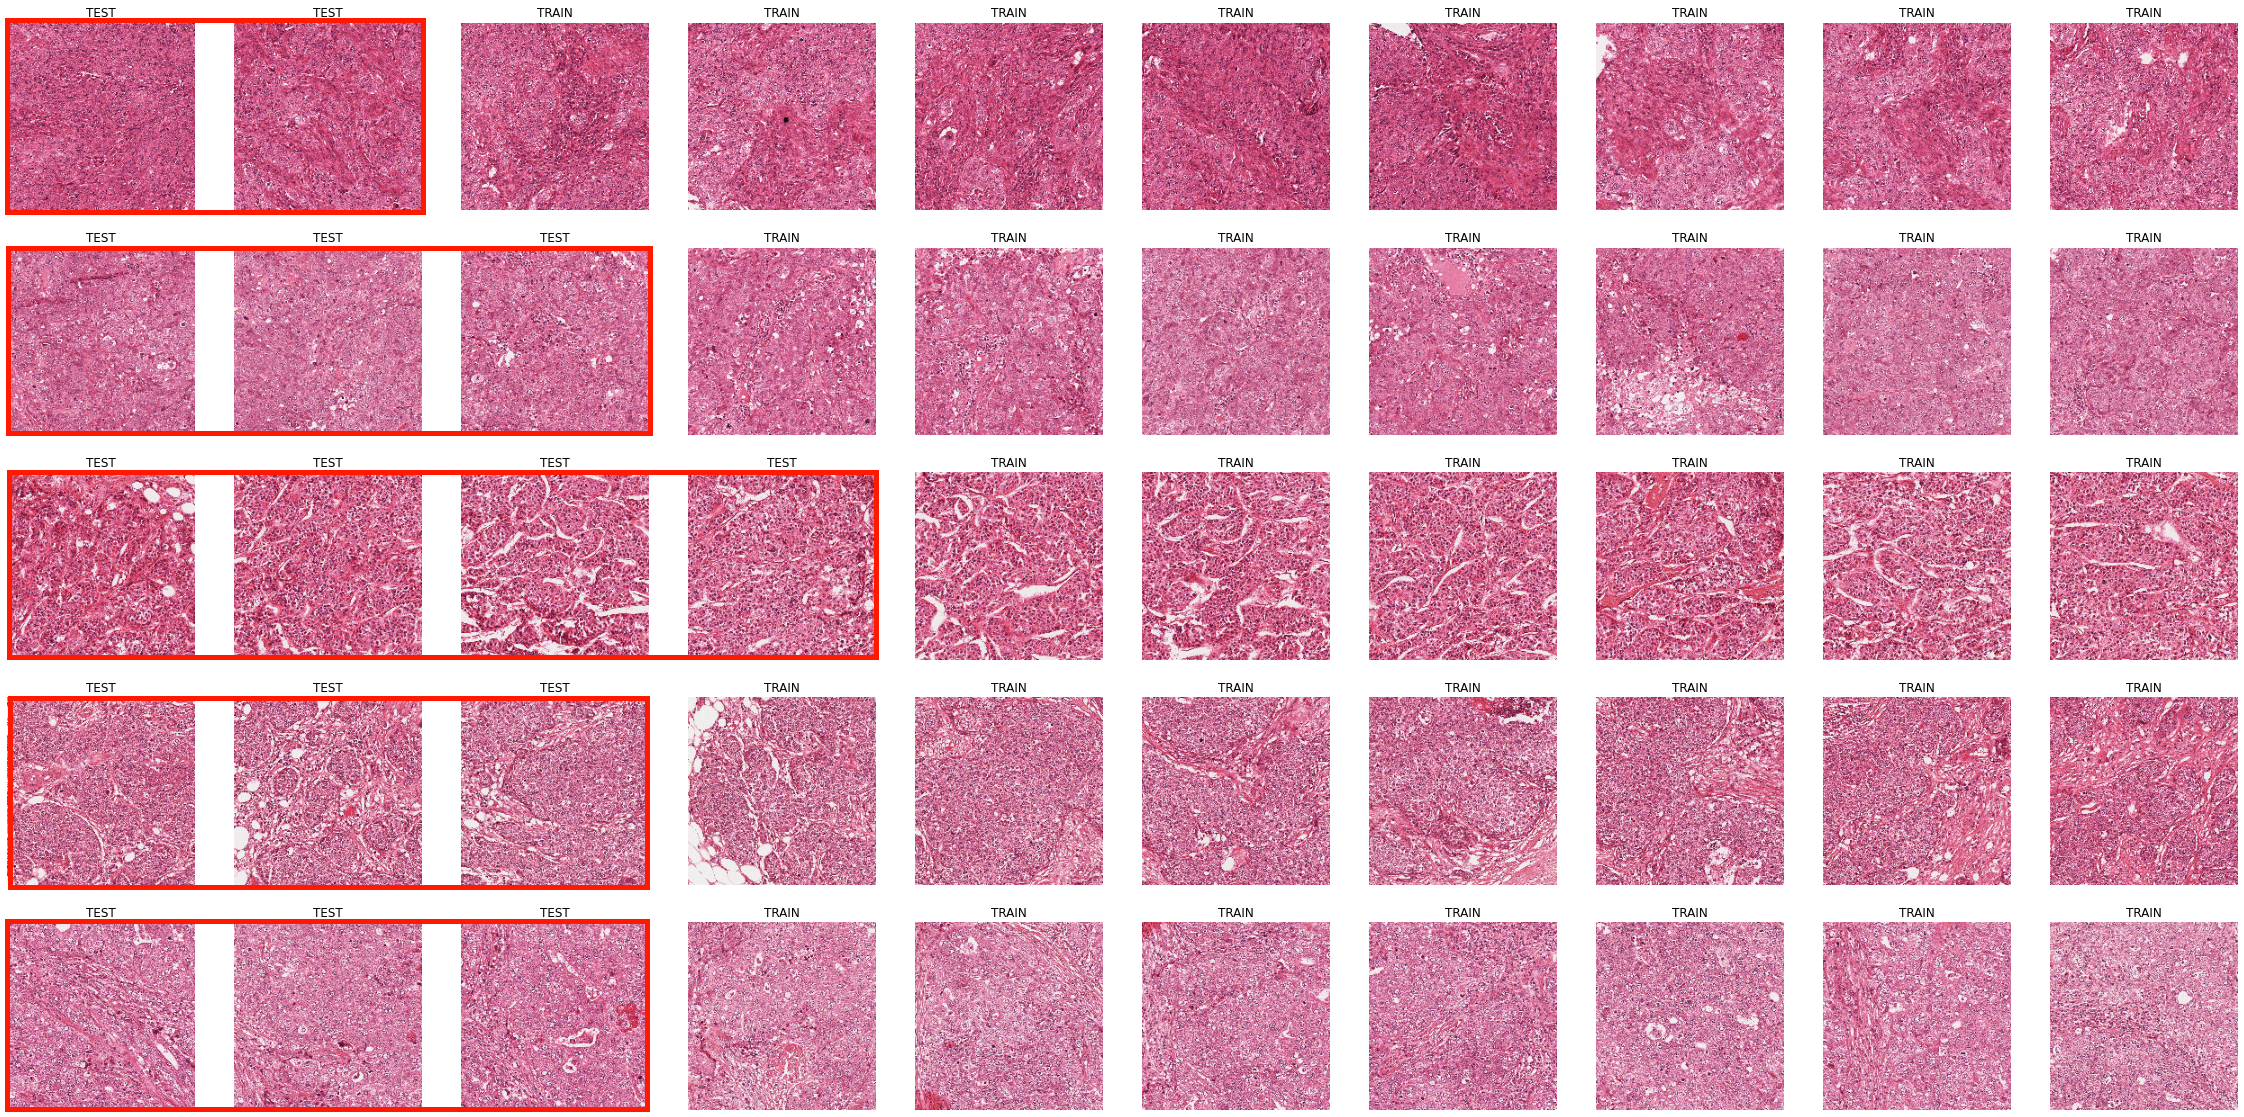 Figure 8.1. All (heavily down-sampled) images from the MITOS12 dataset. Each row corresponds to a different WSI. Images within the red rectangles are part of the test set.